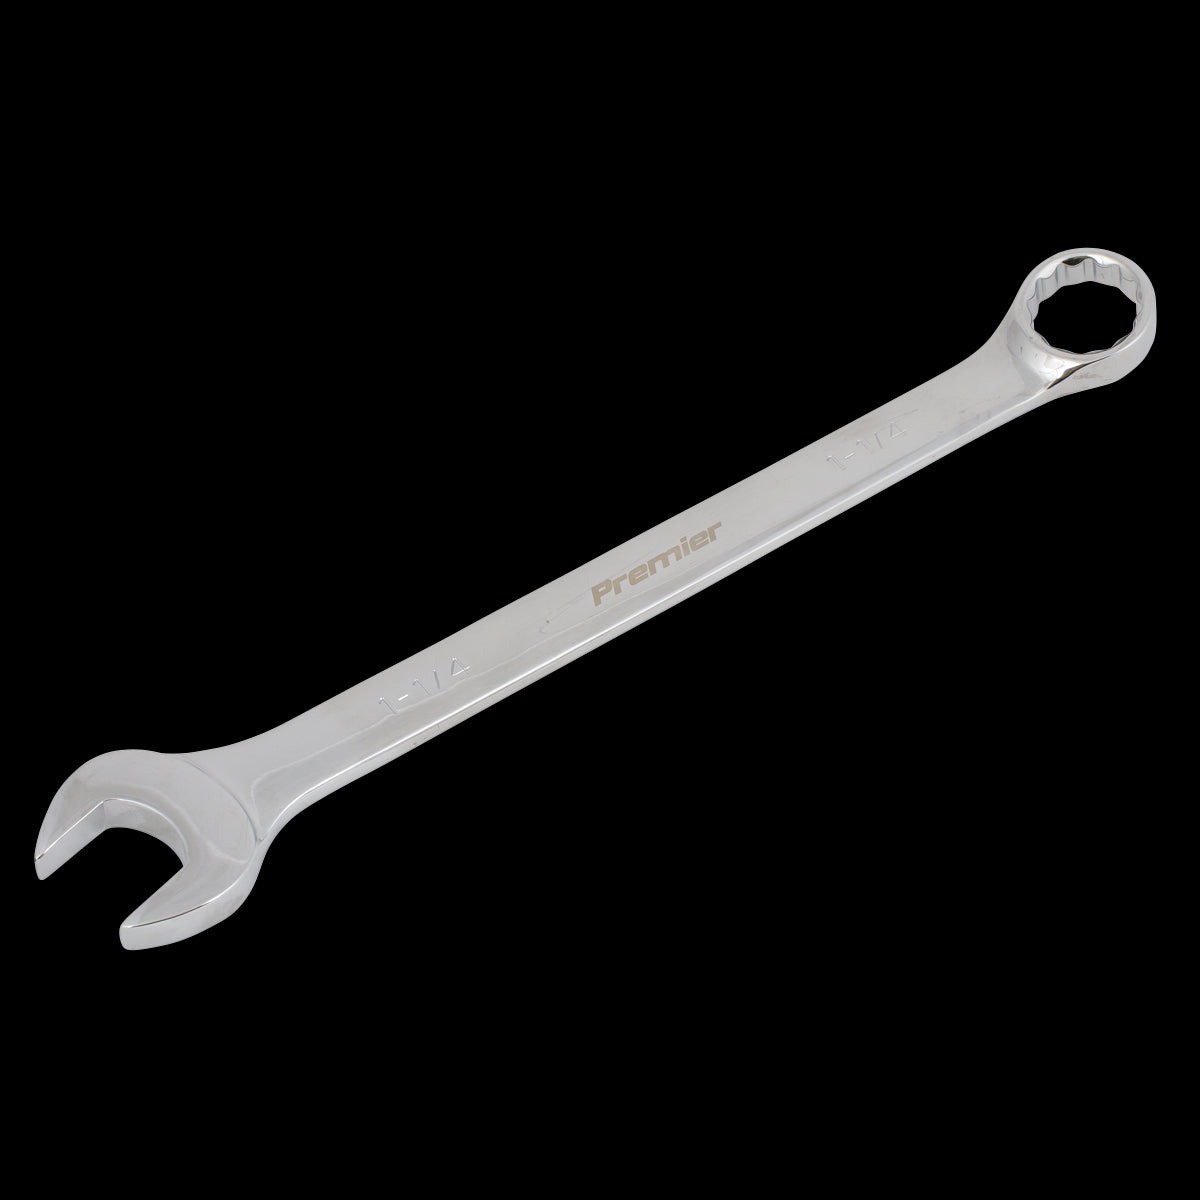 Sealey Premier Combination Spanner 1-1/4" - Imperial